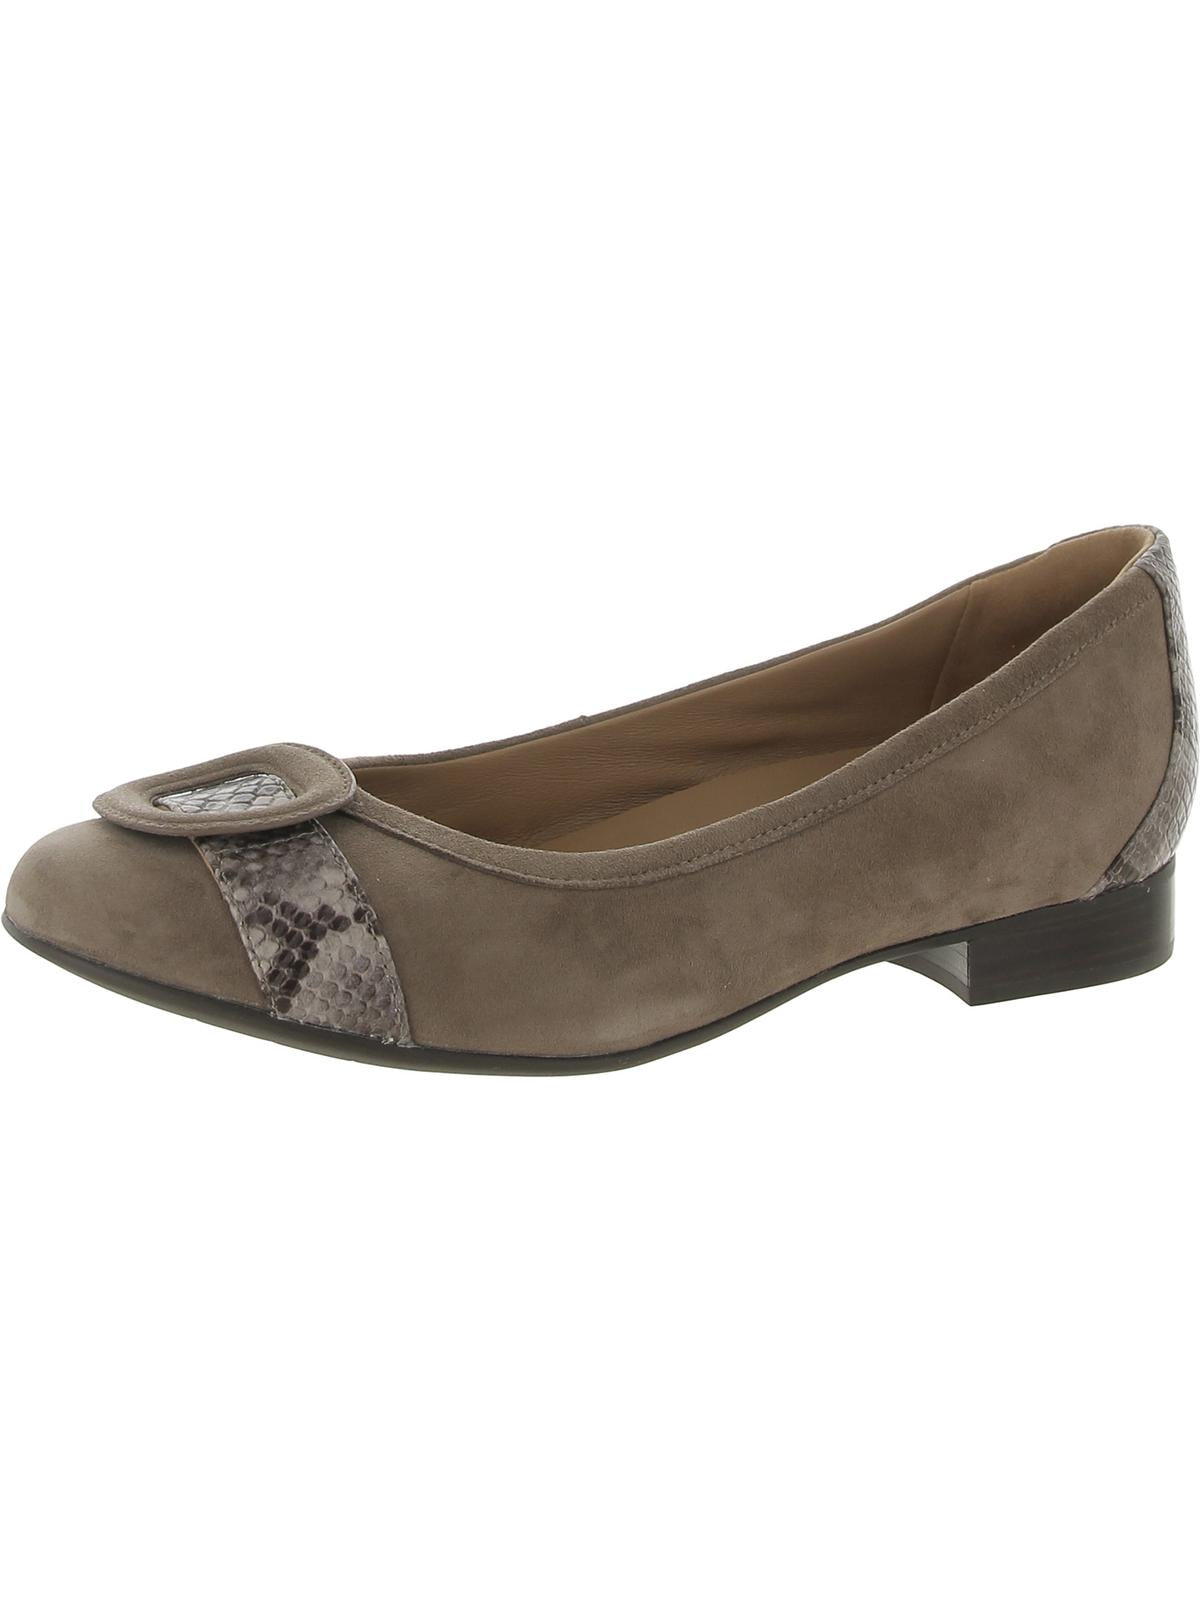 Shop Unstructured By Clarks Womens Suede Heeled Ballet Flats In Grey